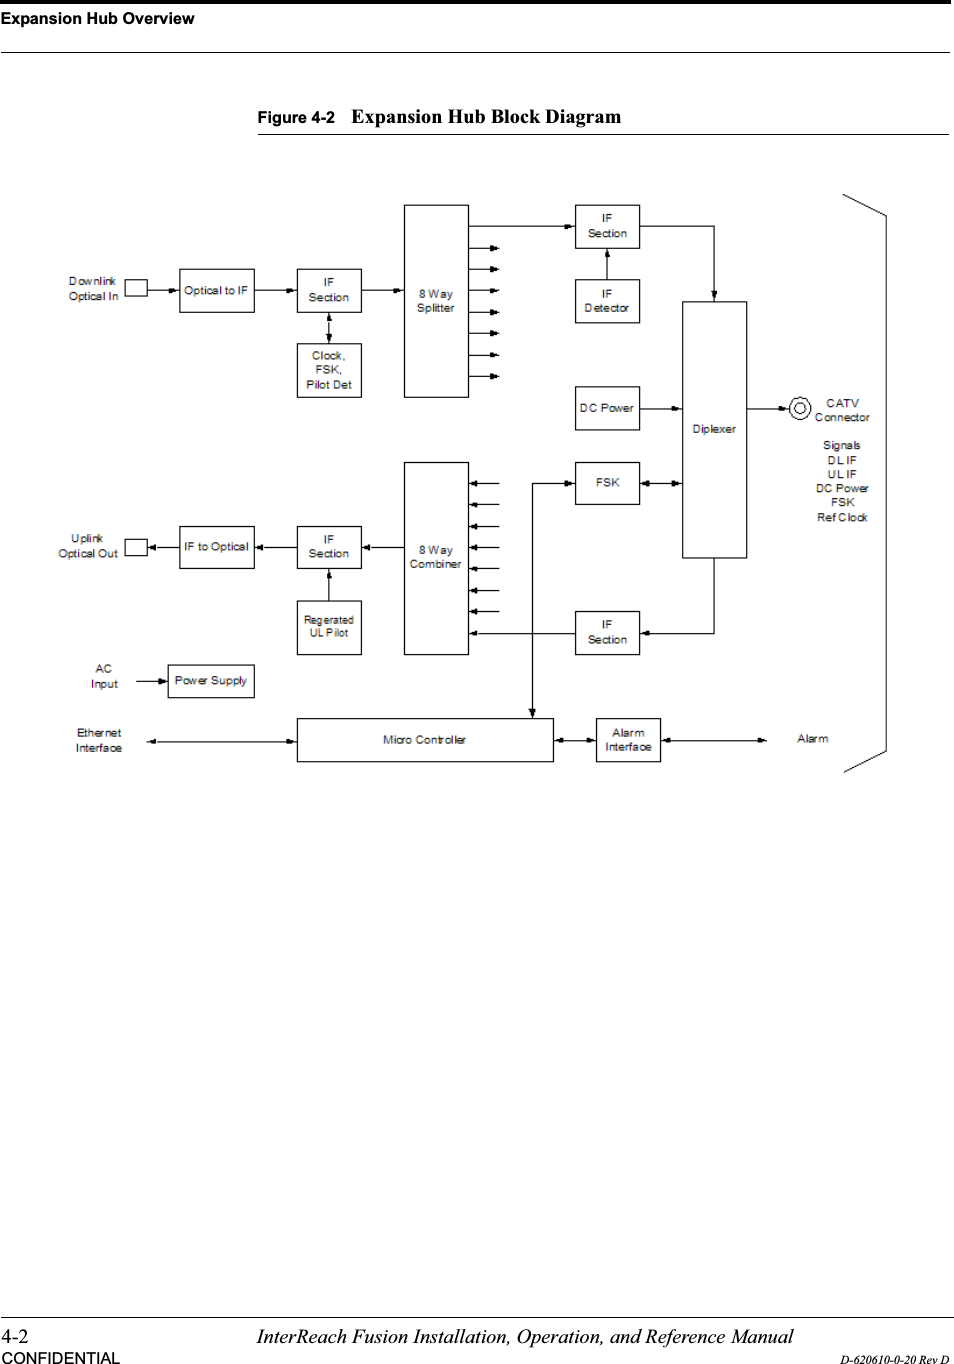 Expansion Hub Overview4-2 InterReach Fusion Installation, Operation, and Reference ManualCONFIDENTIAL D-620610-0-20 Rev DFigure 4-2 Expansion Hub Block Diagram